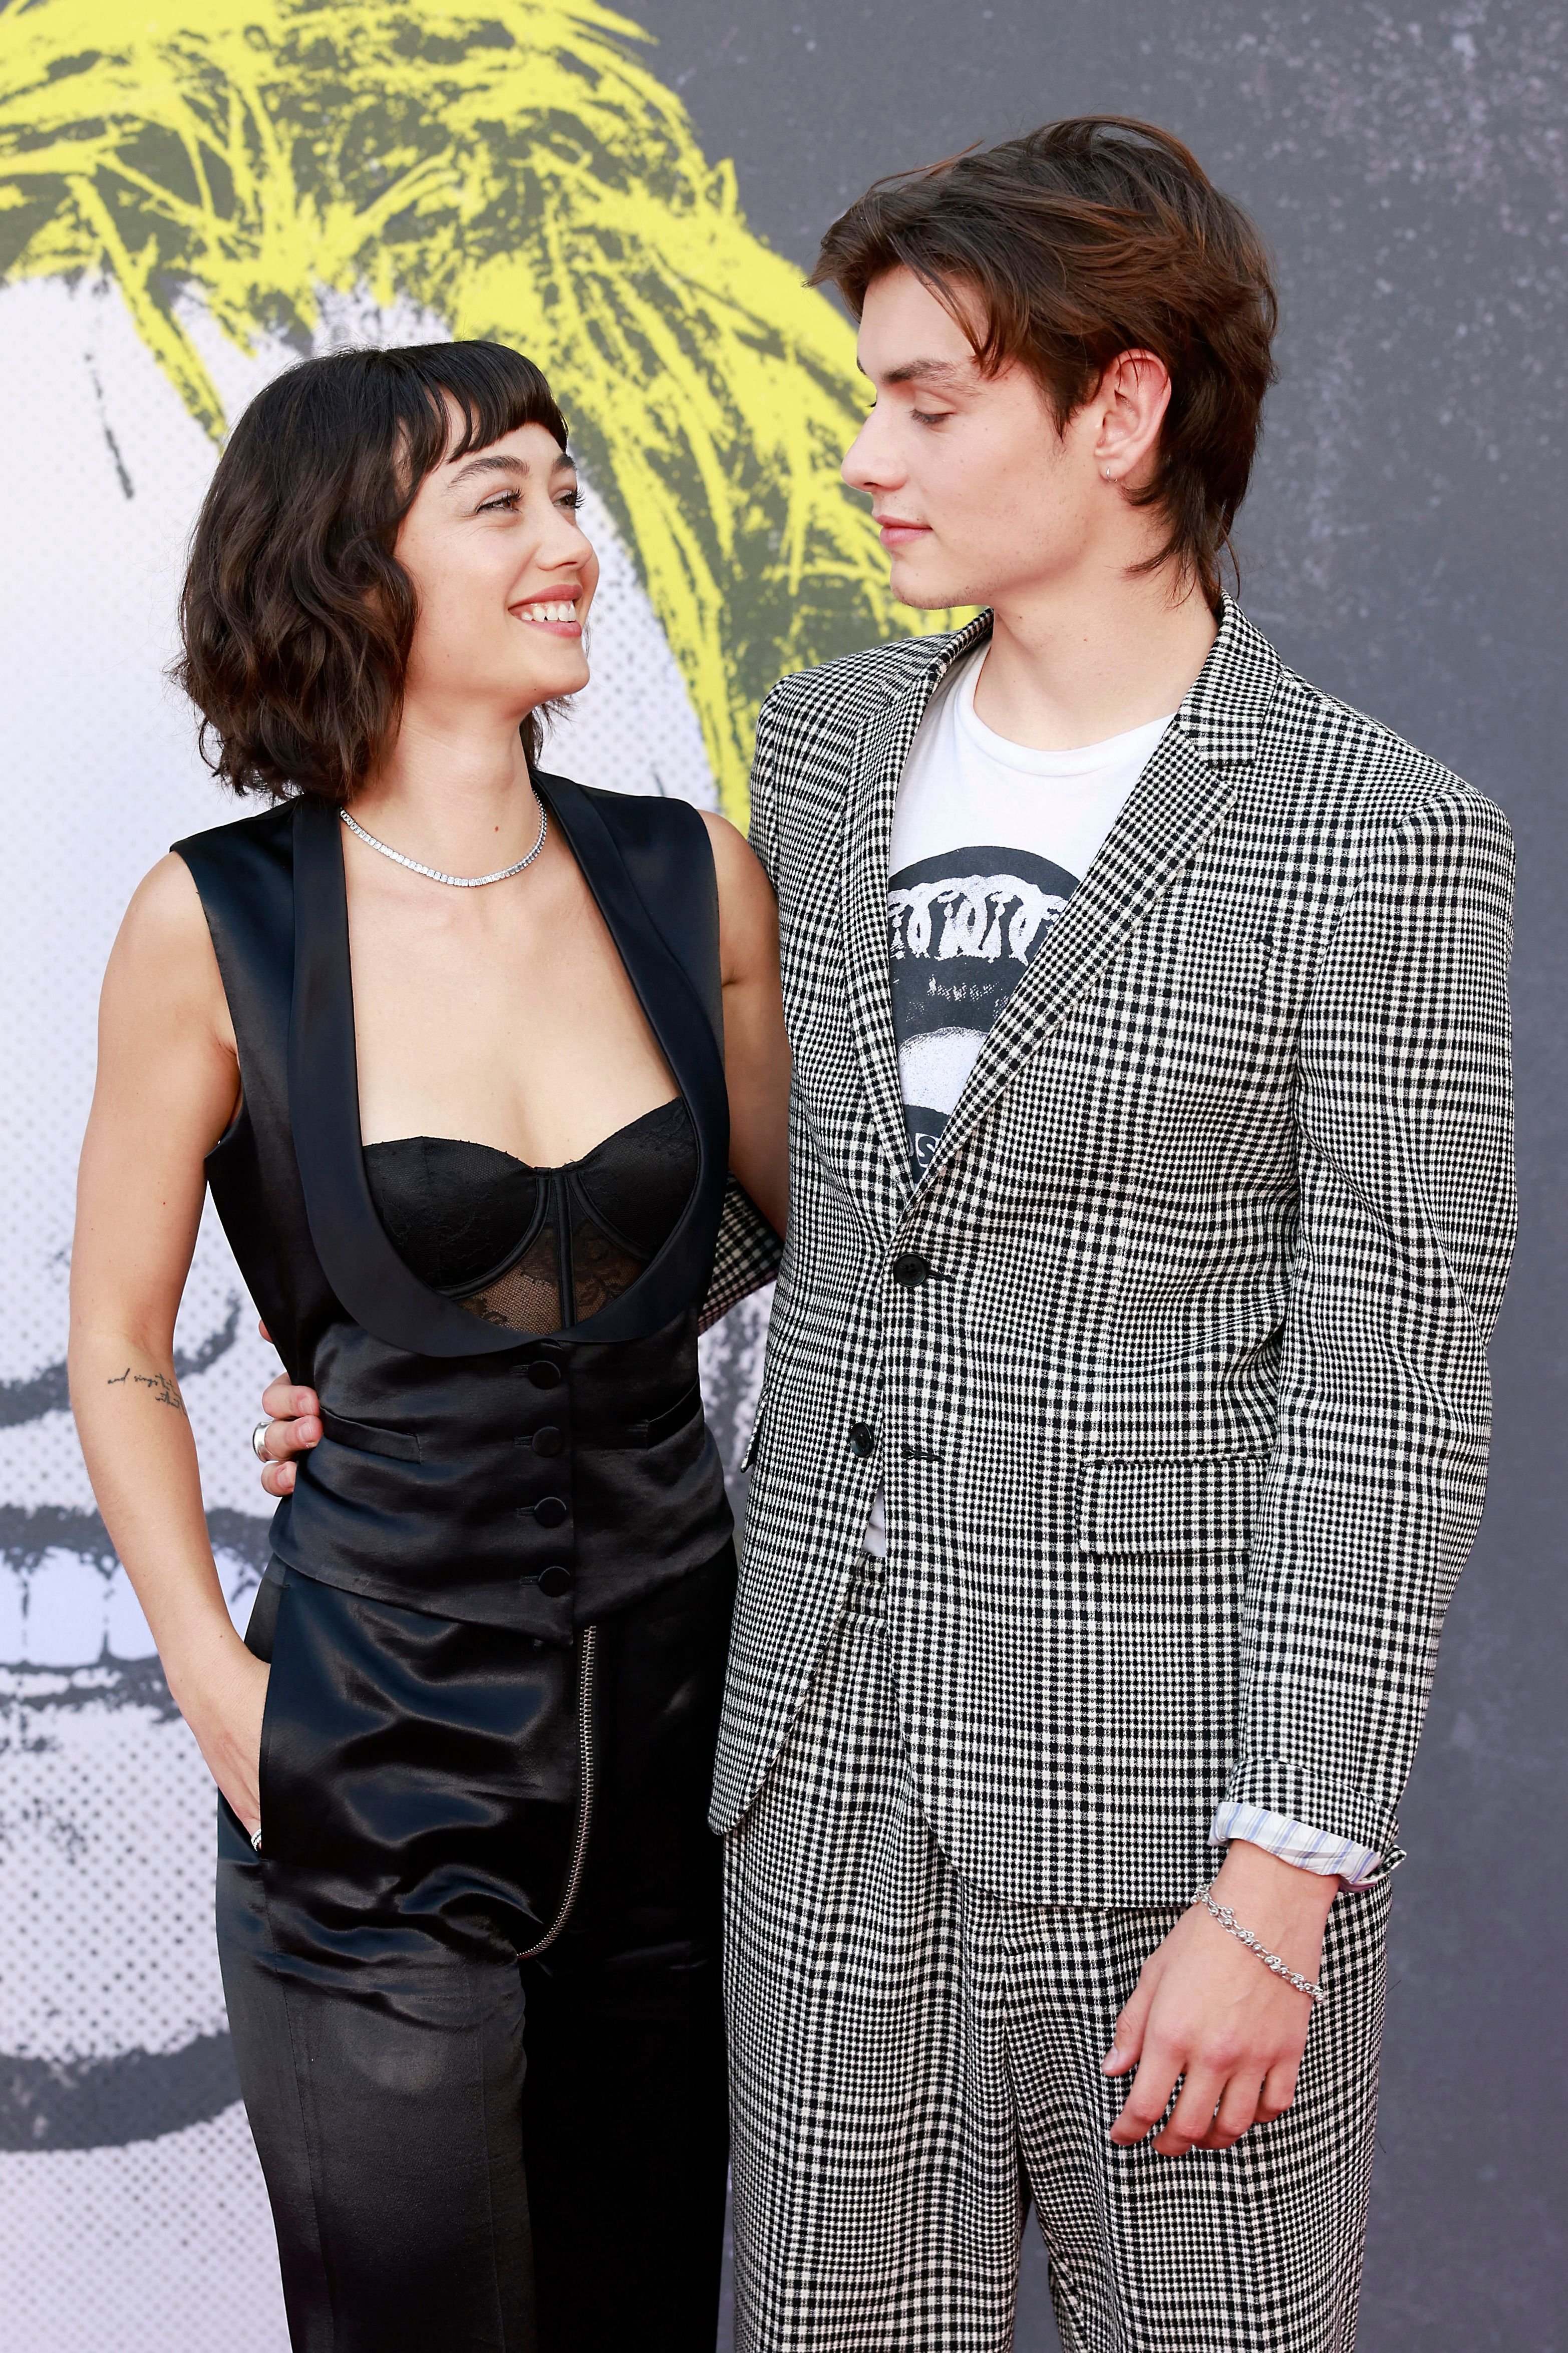 Sydney Chandler and Louis Partridge attend the FX's "Pistol" Los Angeles FYC Event at EL Capitan Theatre on June 7, 2022, in Los Angeles, California. | Source: Getty Images